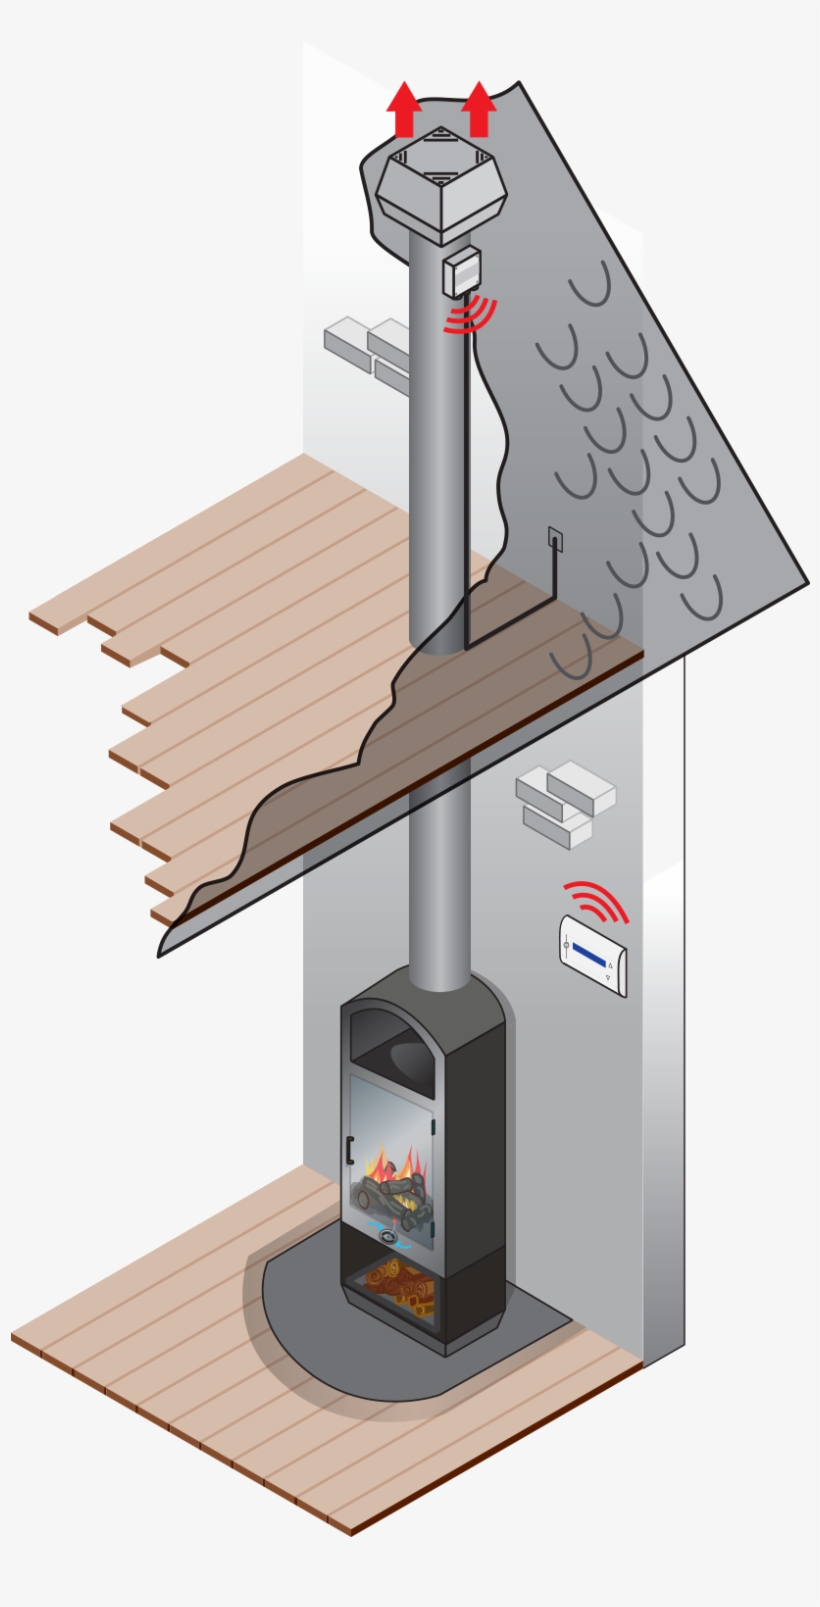 Chimney Fan For Solid Fuel - Heat Recovery Chimney, transparent png #2915792